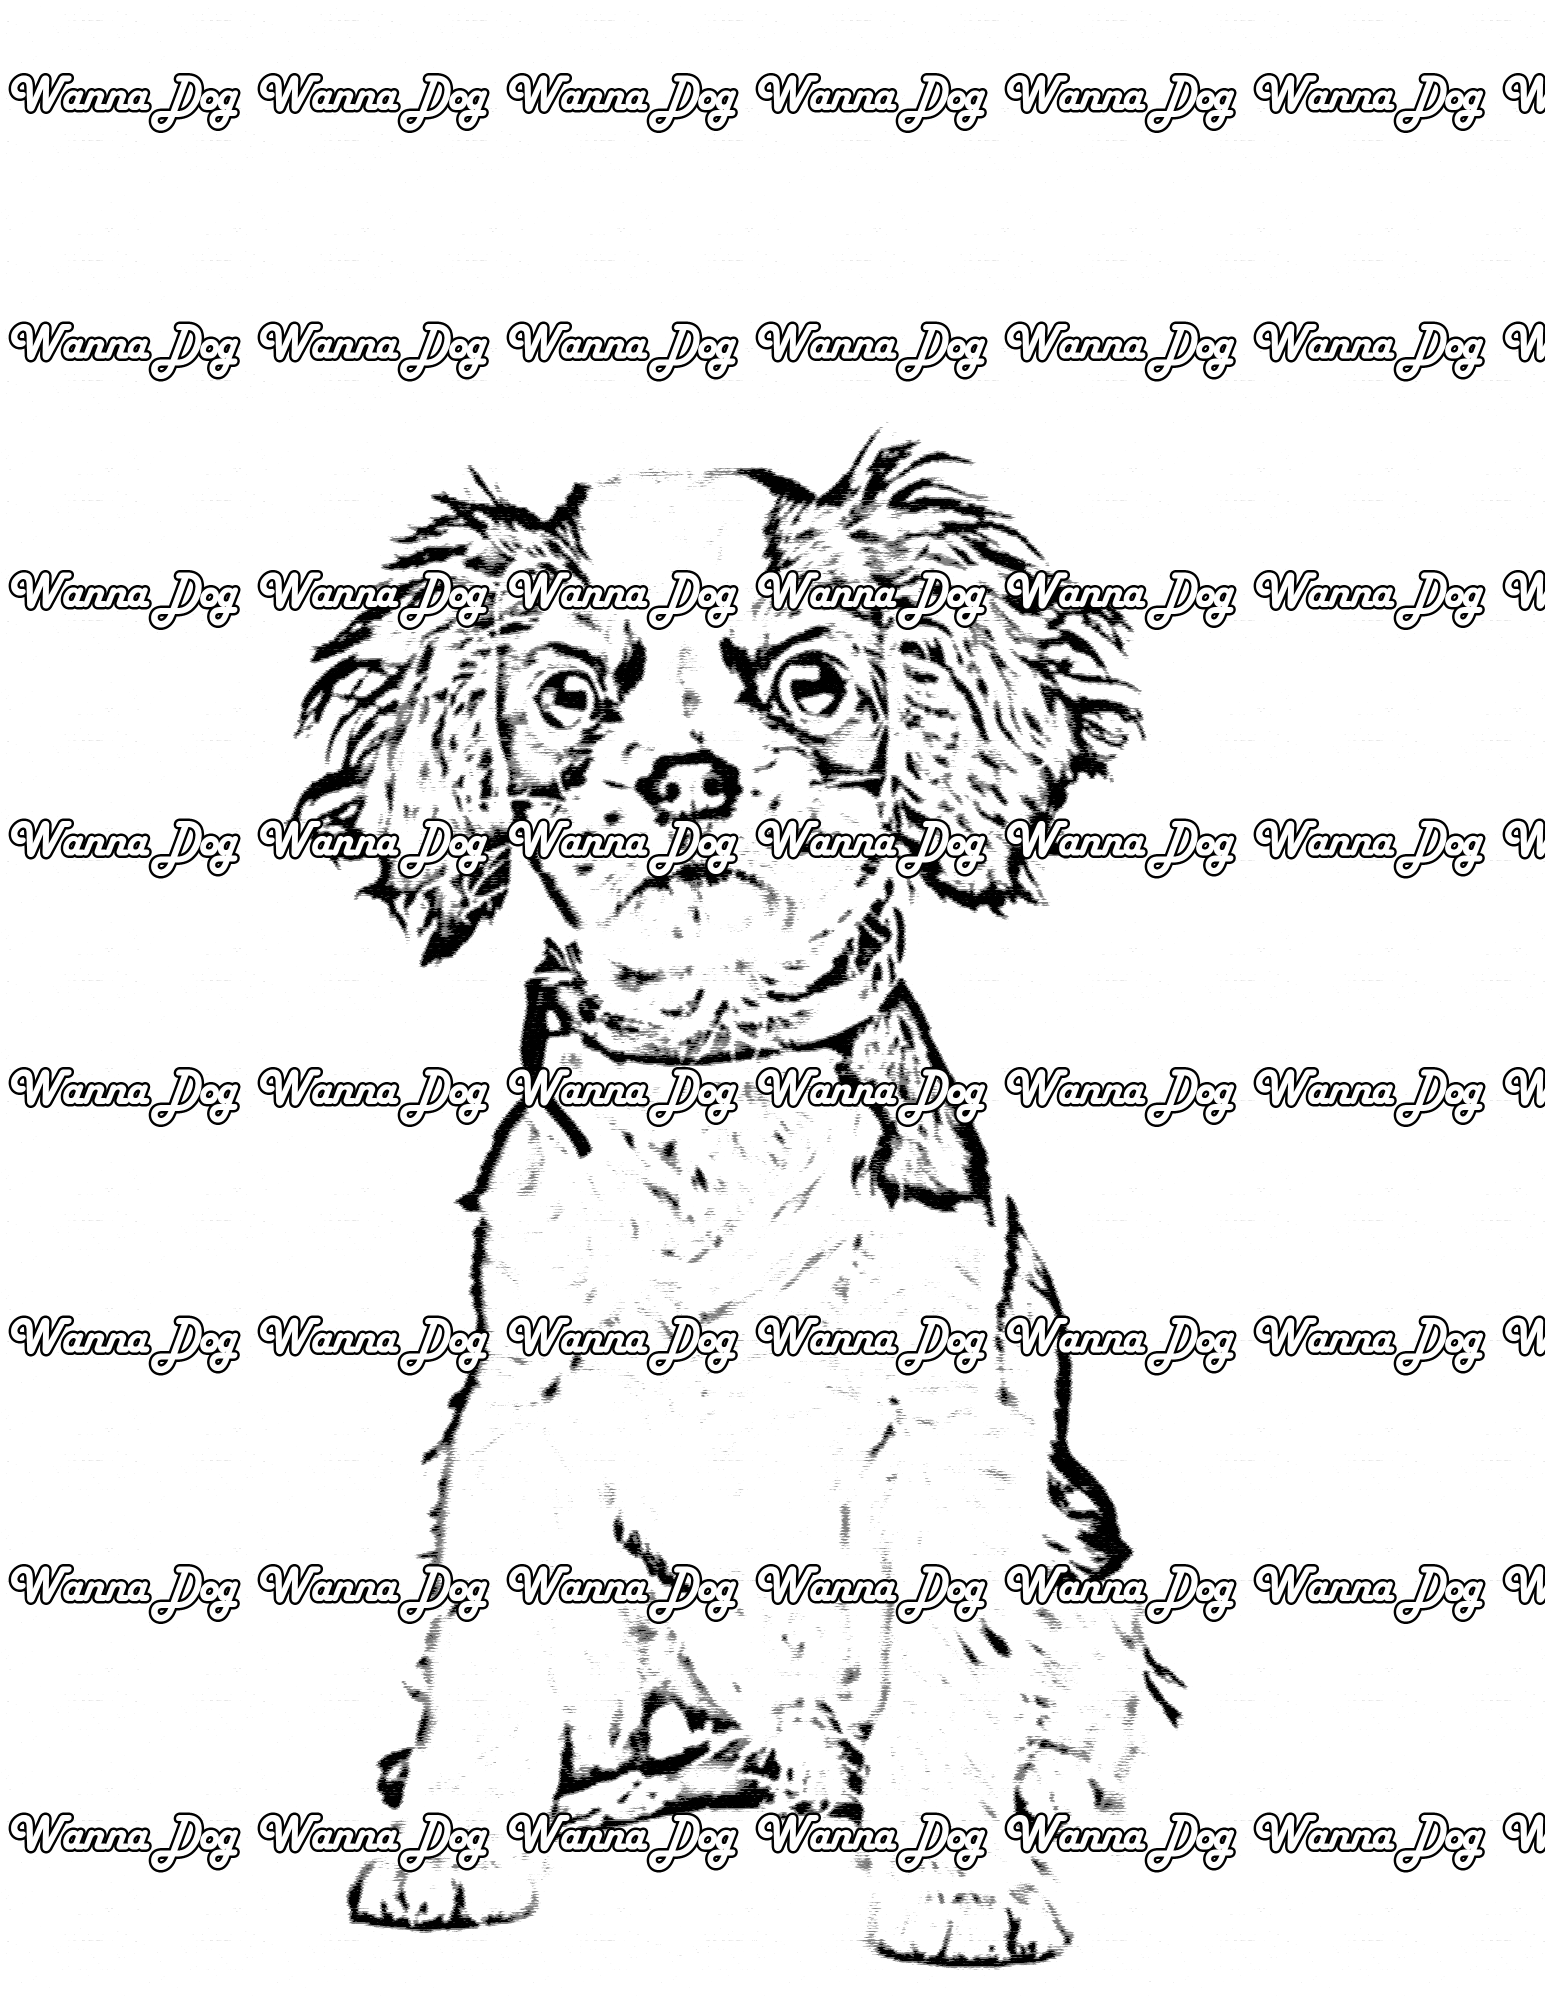 Cavalier King Charles Spaniel Coloring Page of a Cavalier King Charles Spaniel sitting